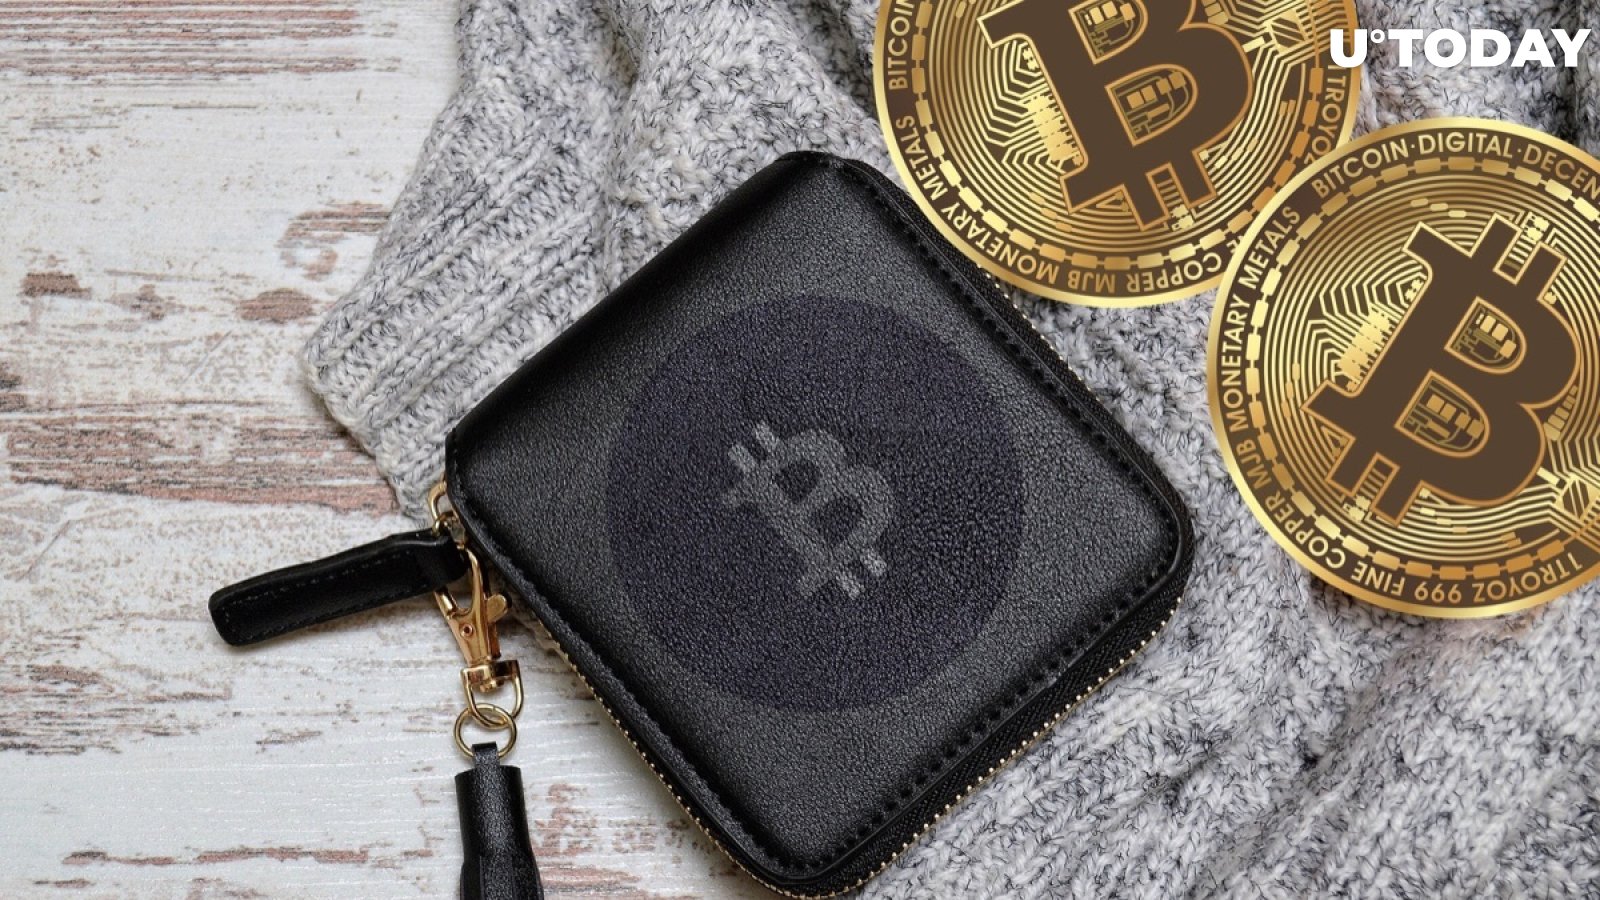 This Bitcoin Wallet Will Set You Back $50,000